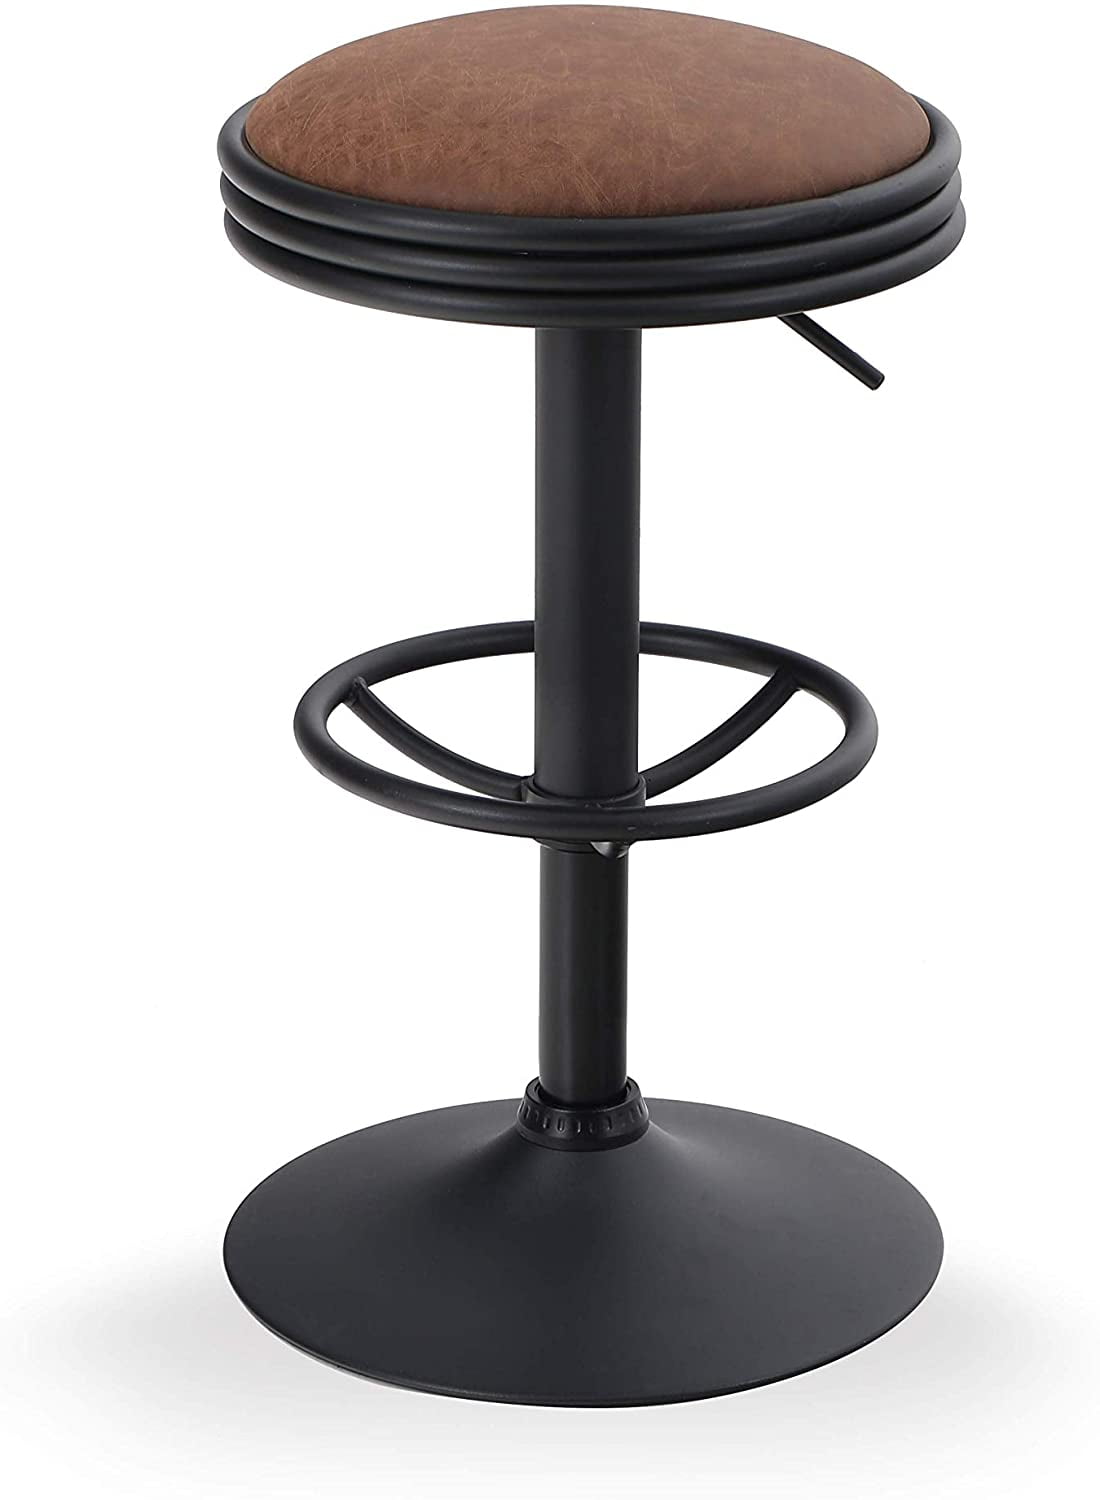 Set Of 2 PU Leather Rounded Tub Bar Stools Adjustable Height w/ Footrest Black 